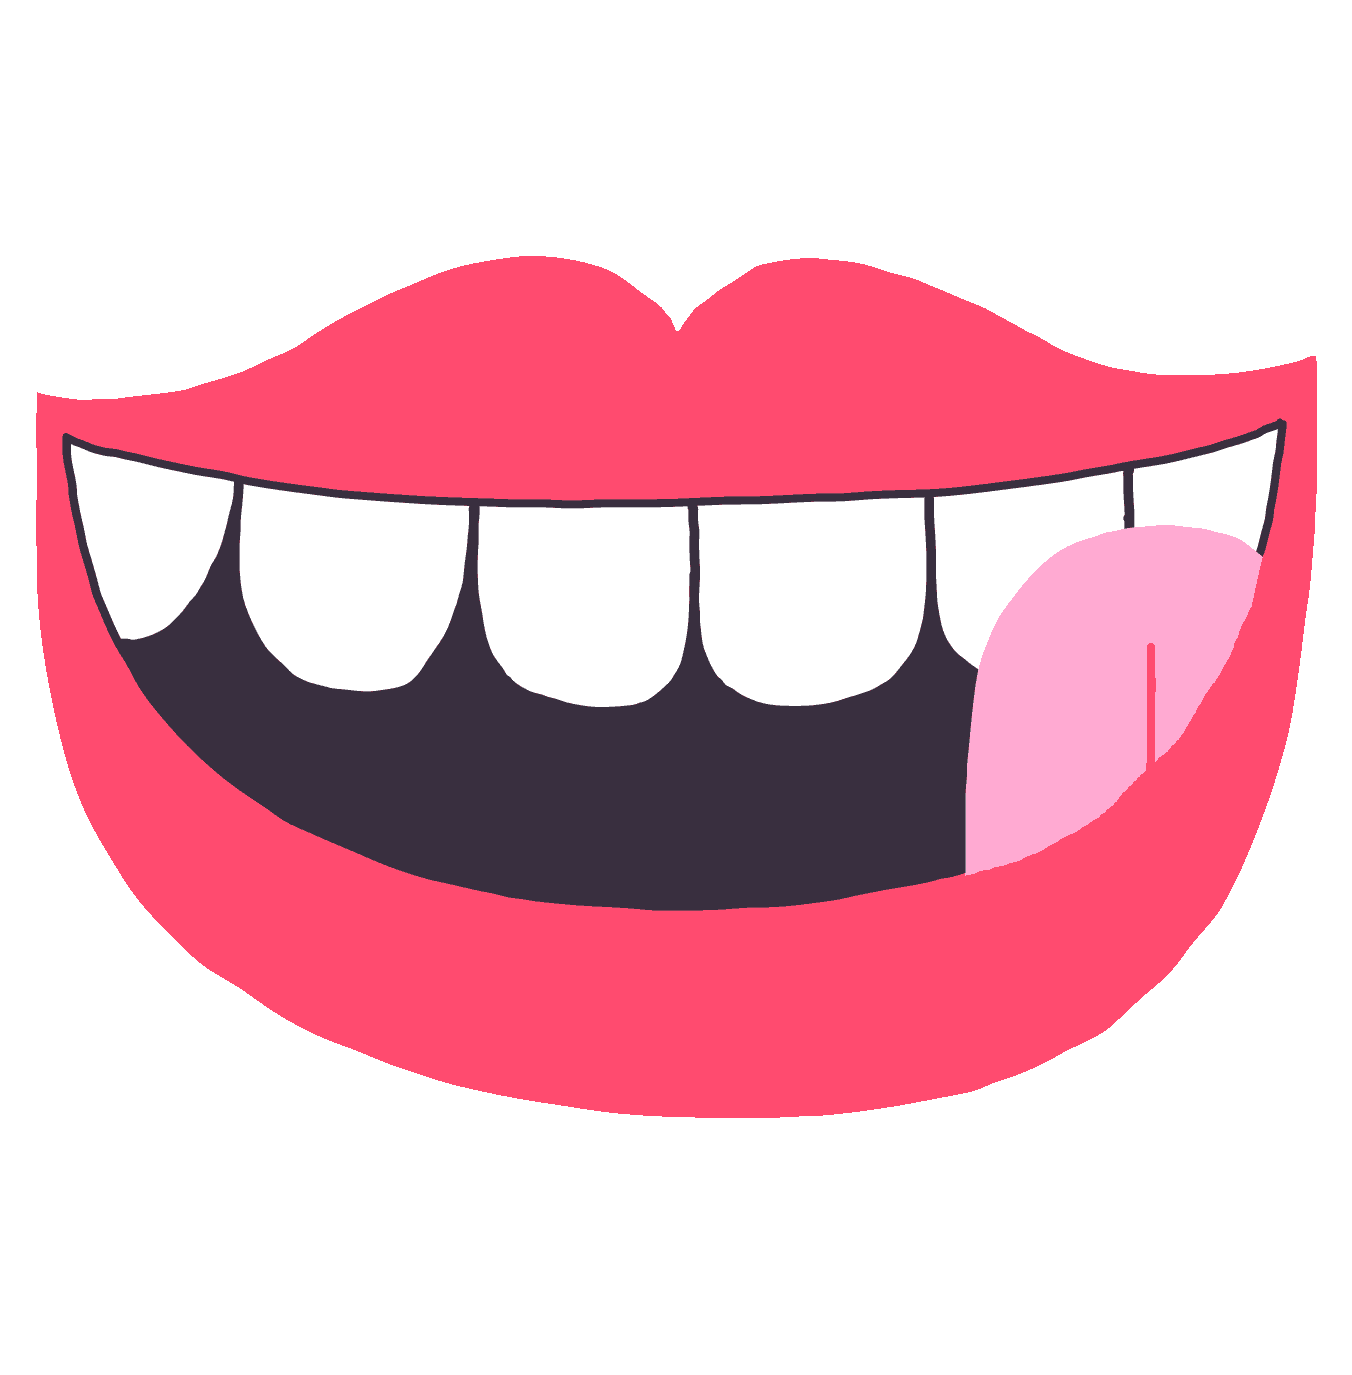 tooth clipart tongue